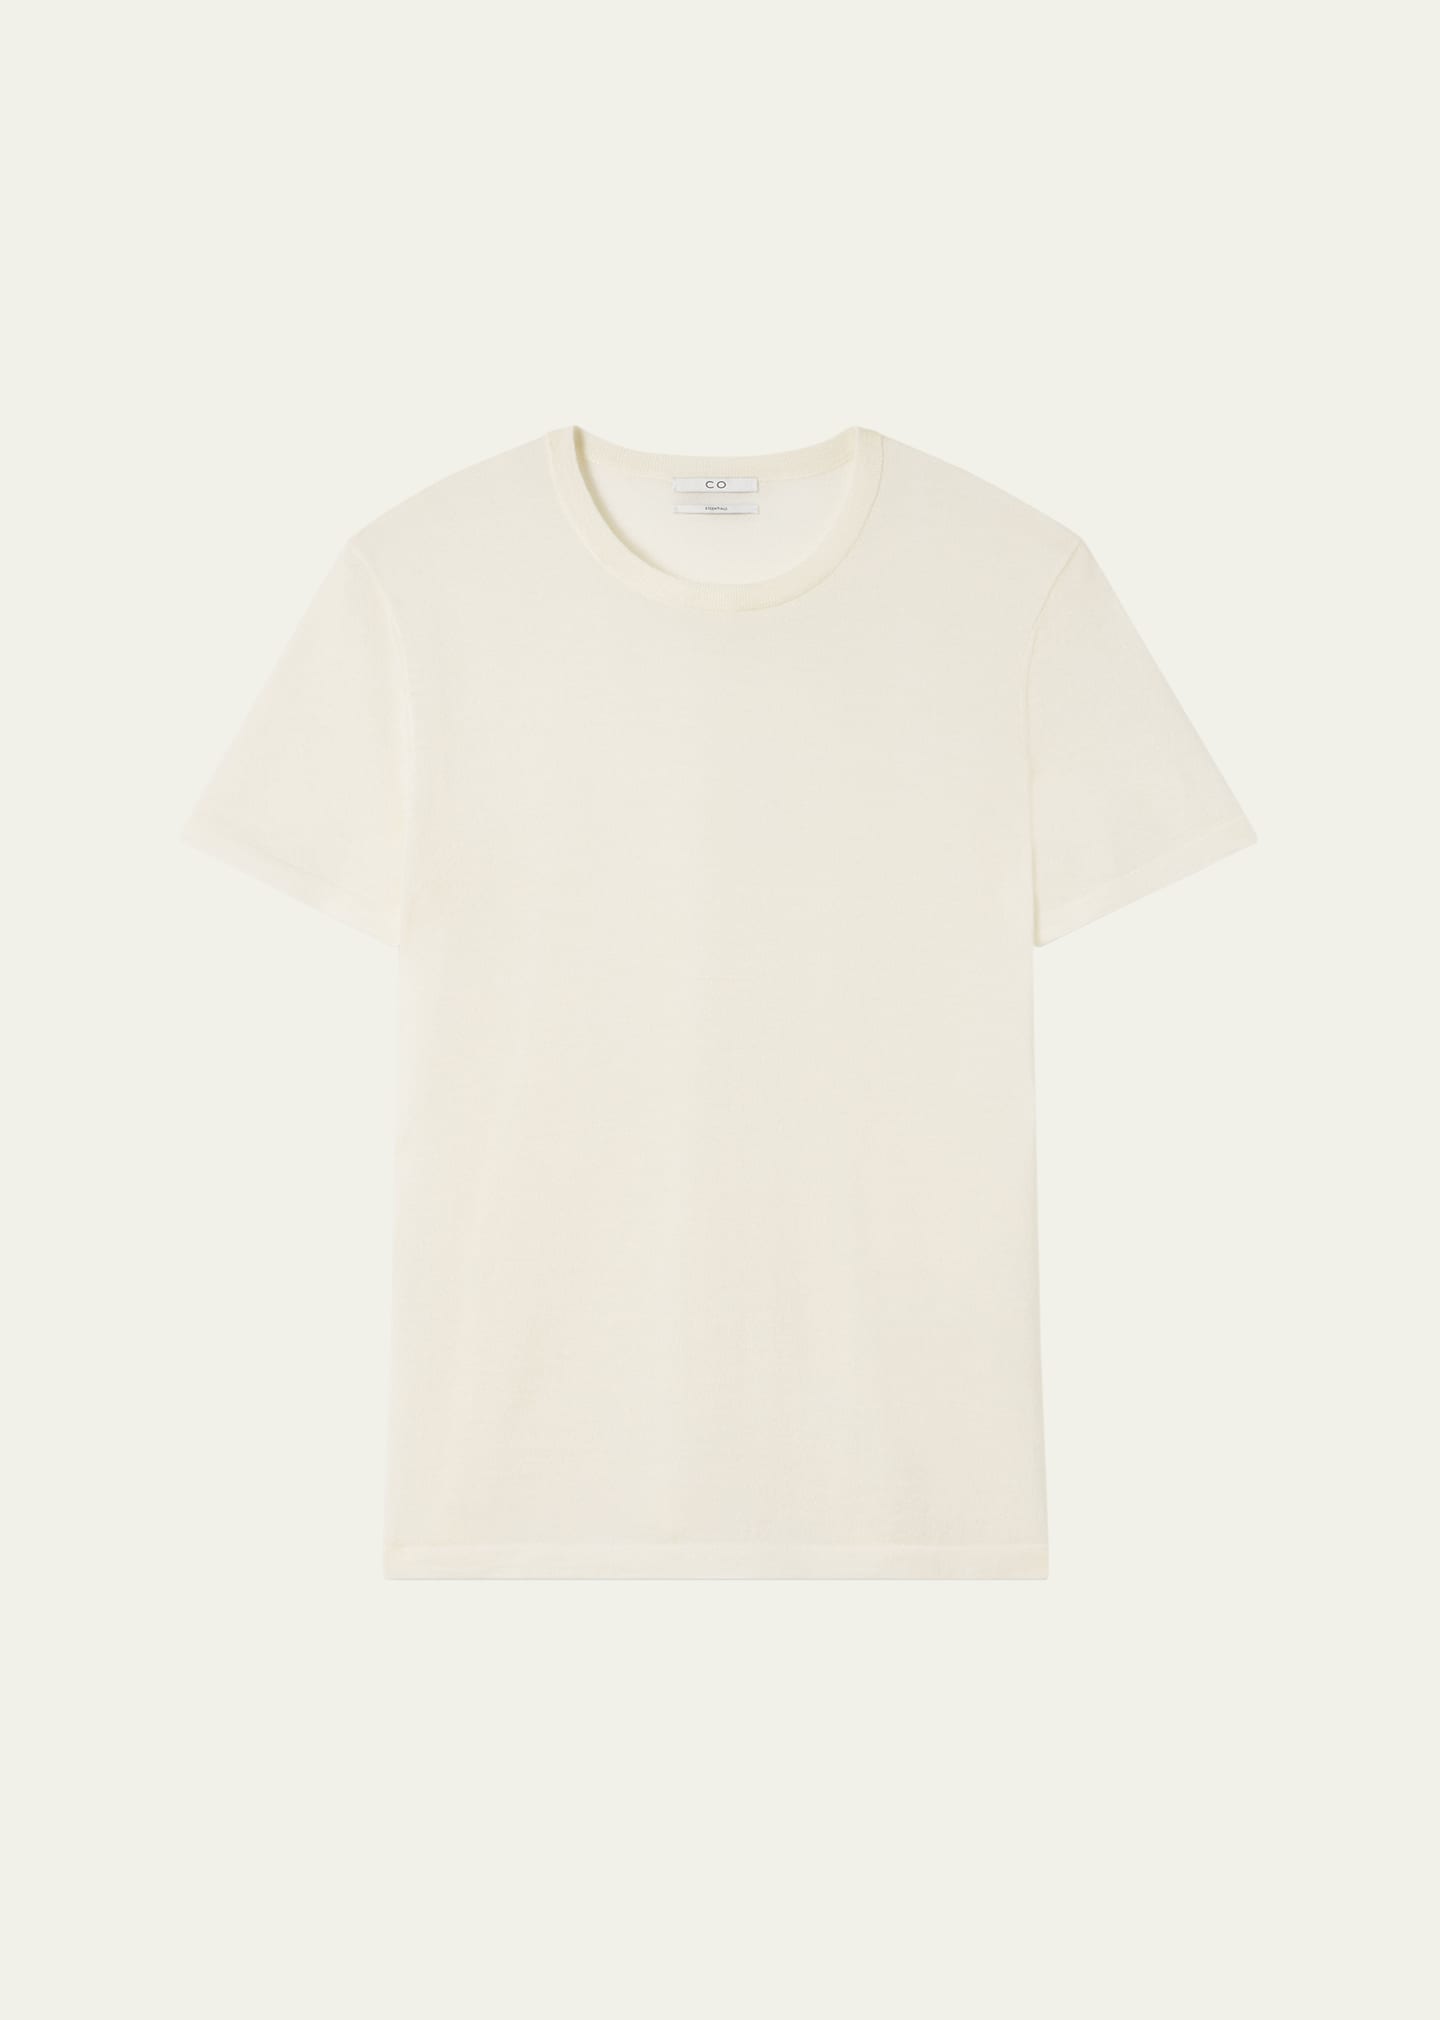 Co Cashmere Short-sleeve T-shirt In White